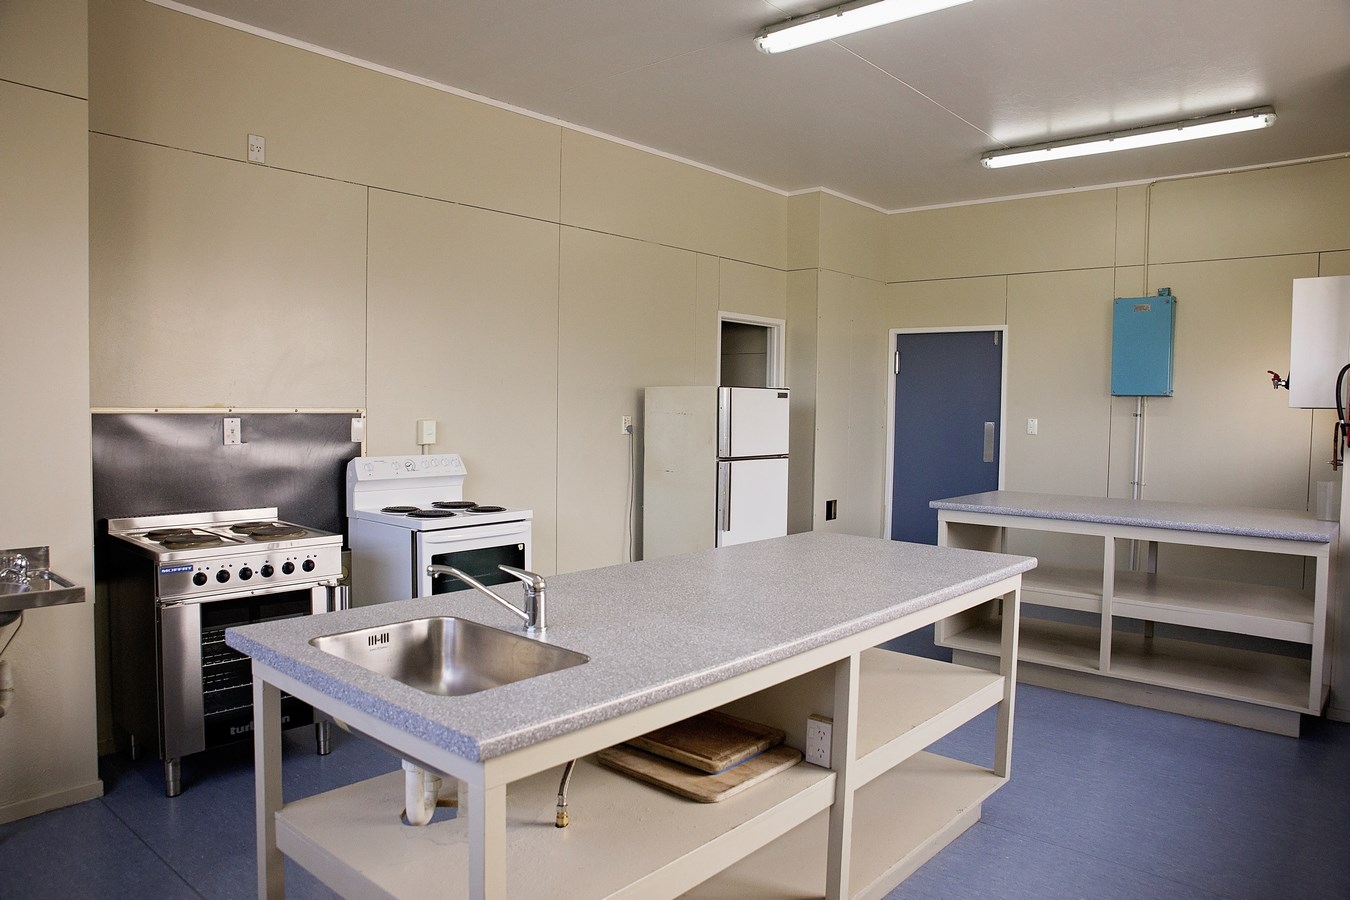 The Catering Kitchen